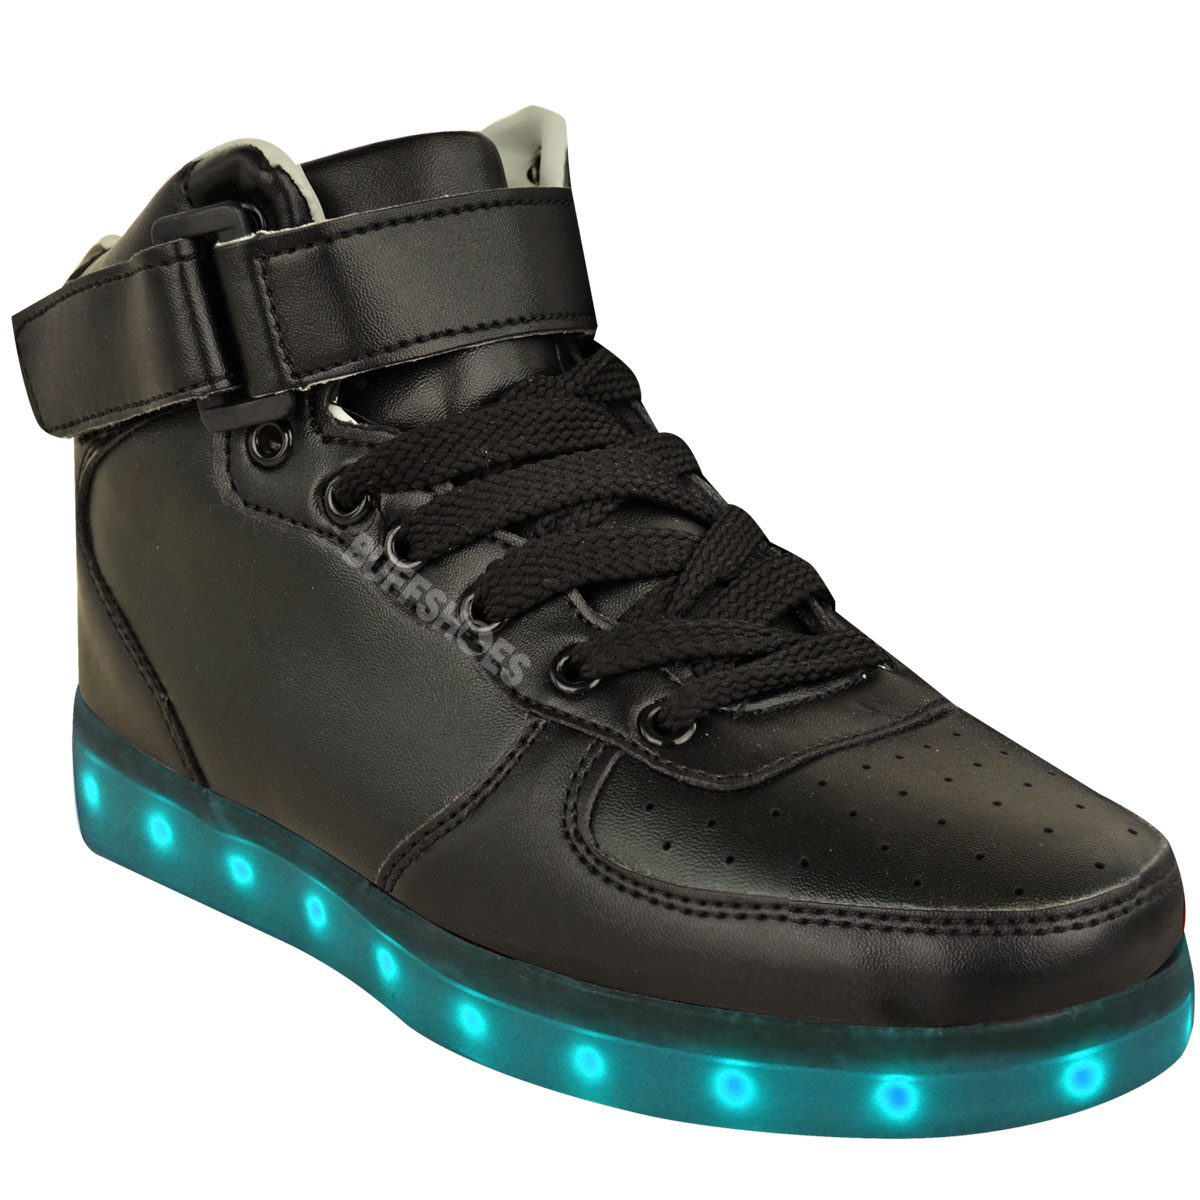 Womens Ladies USB LED Lights Sneakers Shoes Luminous Sportswear Lace Up ...